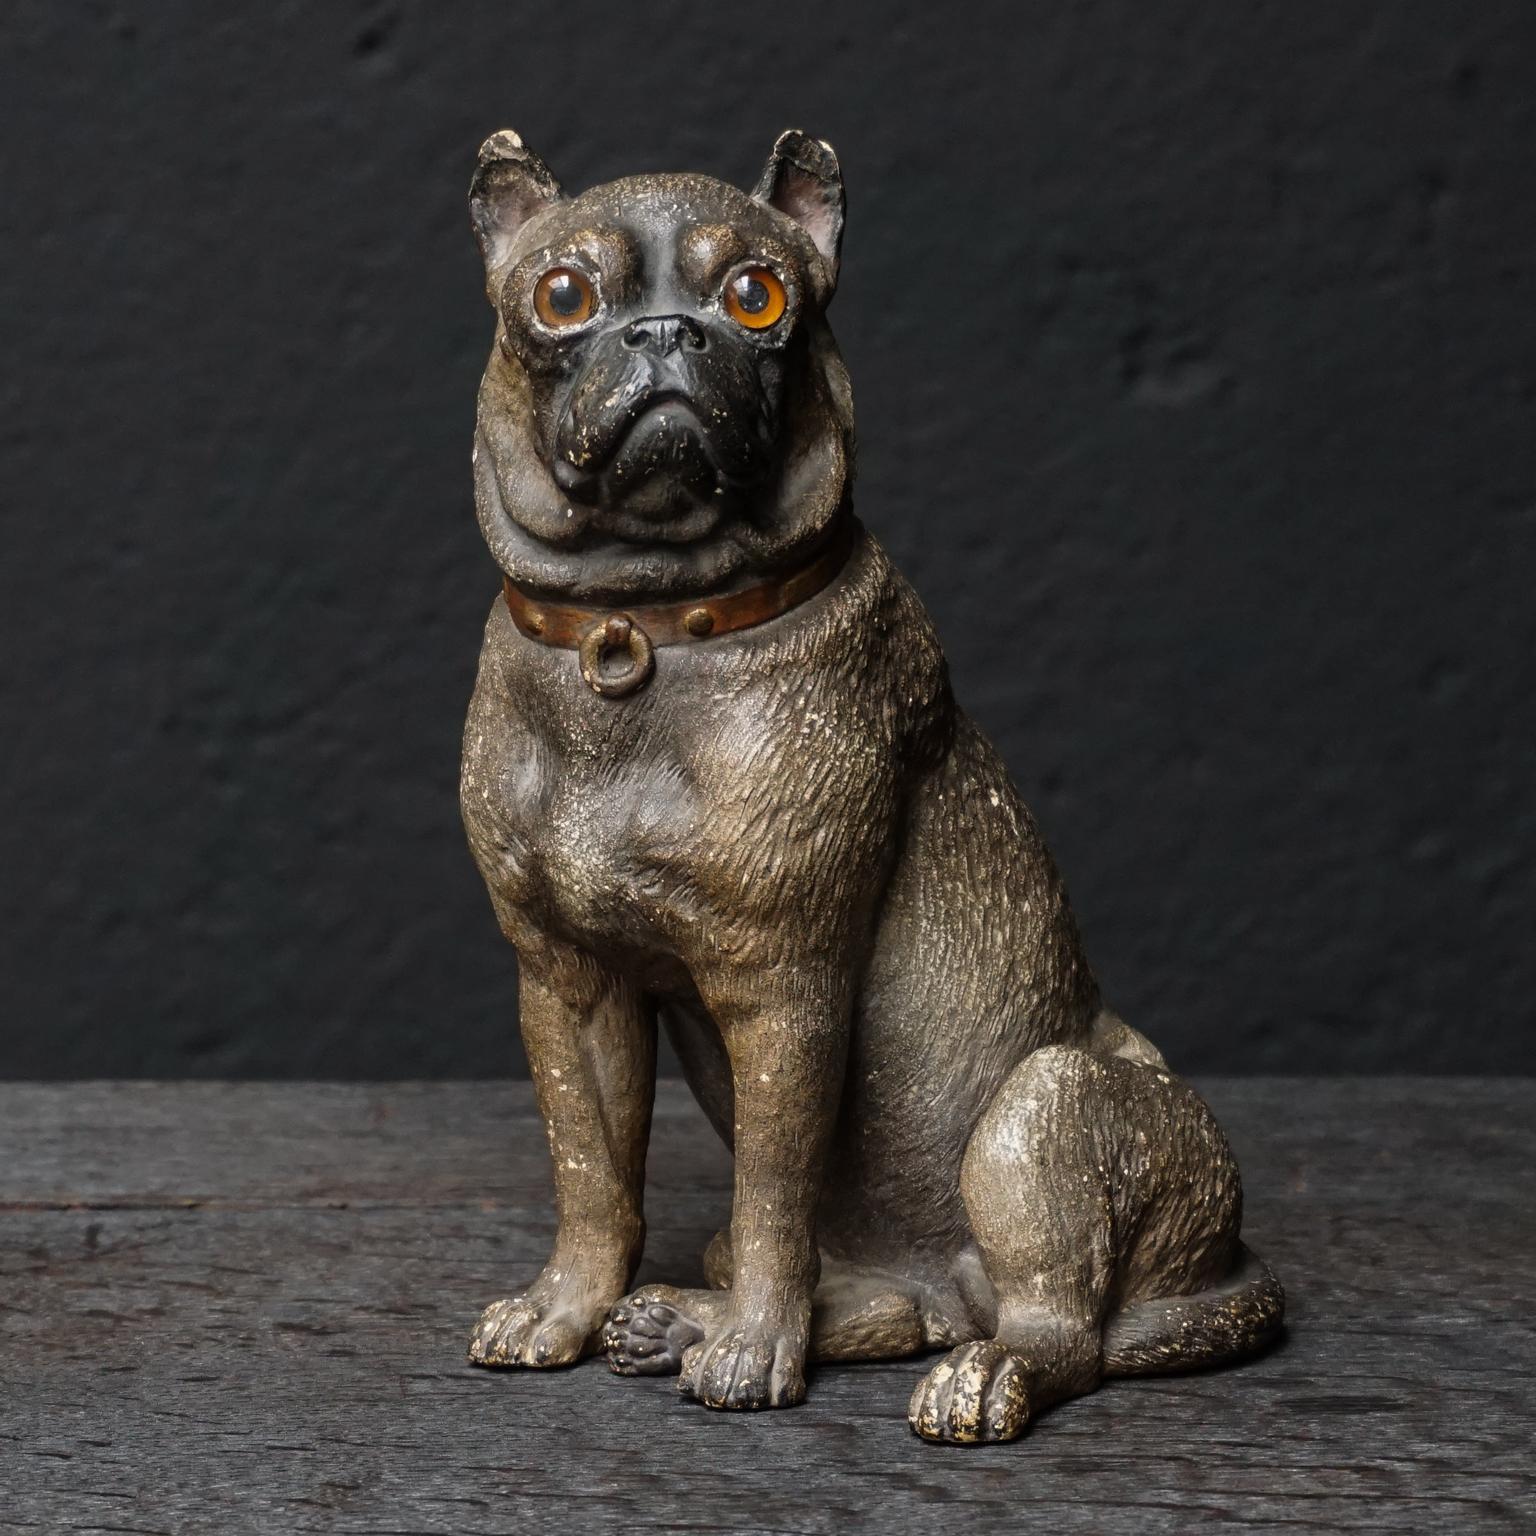 I found this very lovely Austrian cold painted terracotta model of a Pug Dogie in seated position with little red collar adorned with gold painted studs and ring, from late 19th century and immediately thought of it probably looking great with my